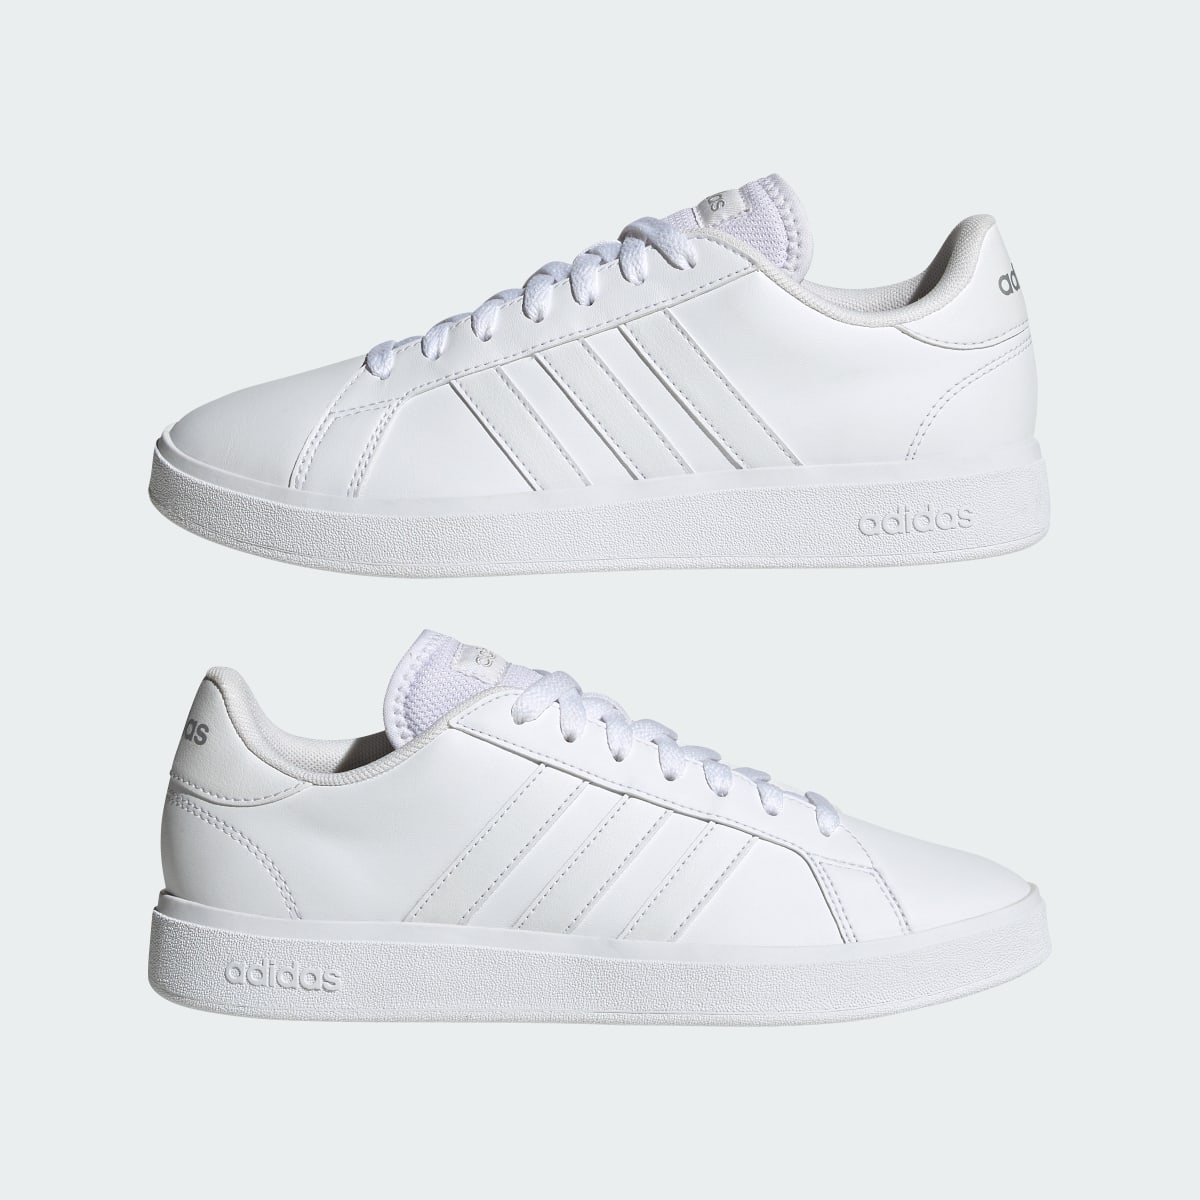 Adidas Grand Court TD Lifestyle Court Casual Shoes. 8